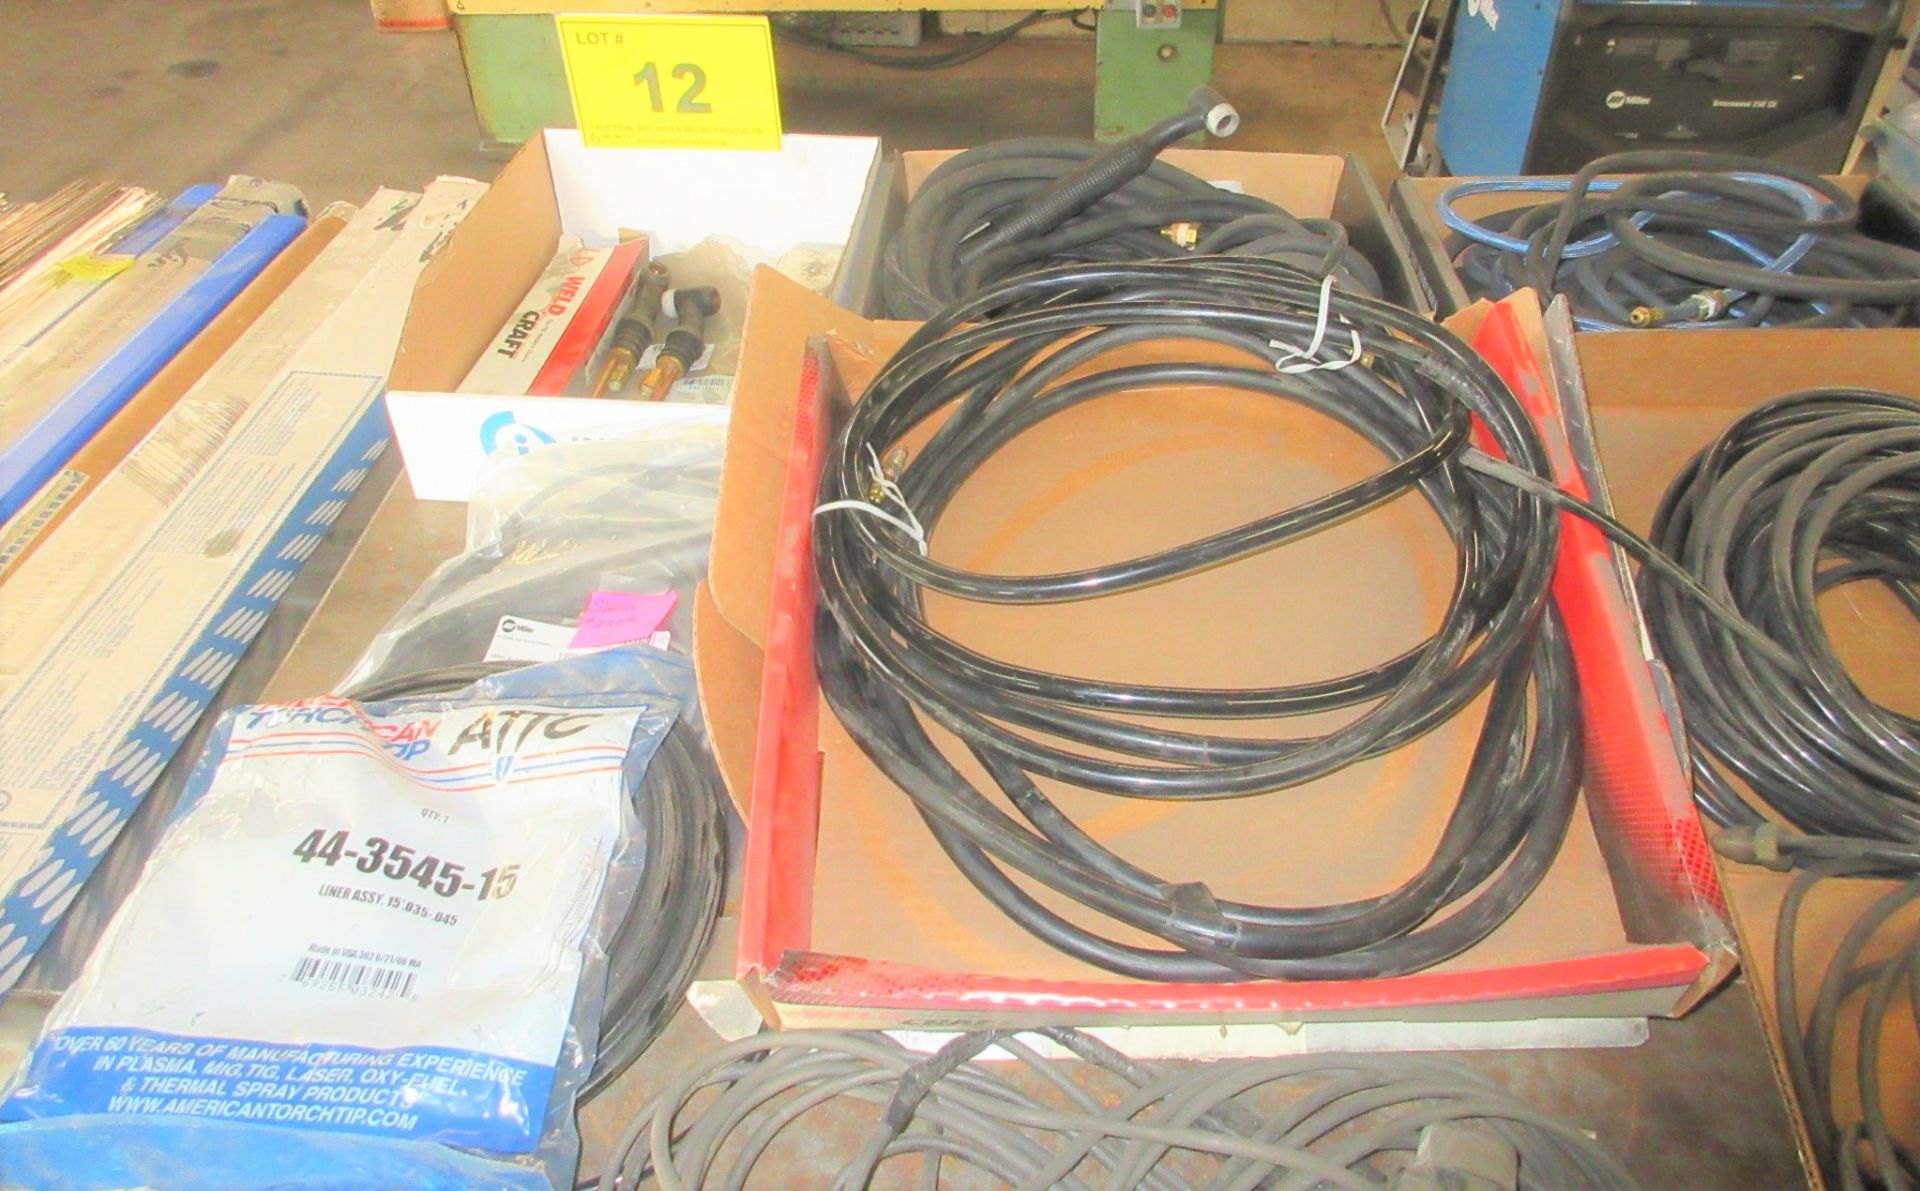 LOT OF WELDING CABLES, TIG / MIG GUNS, ETC. - Image 2 of 4